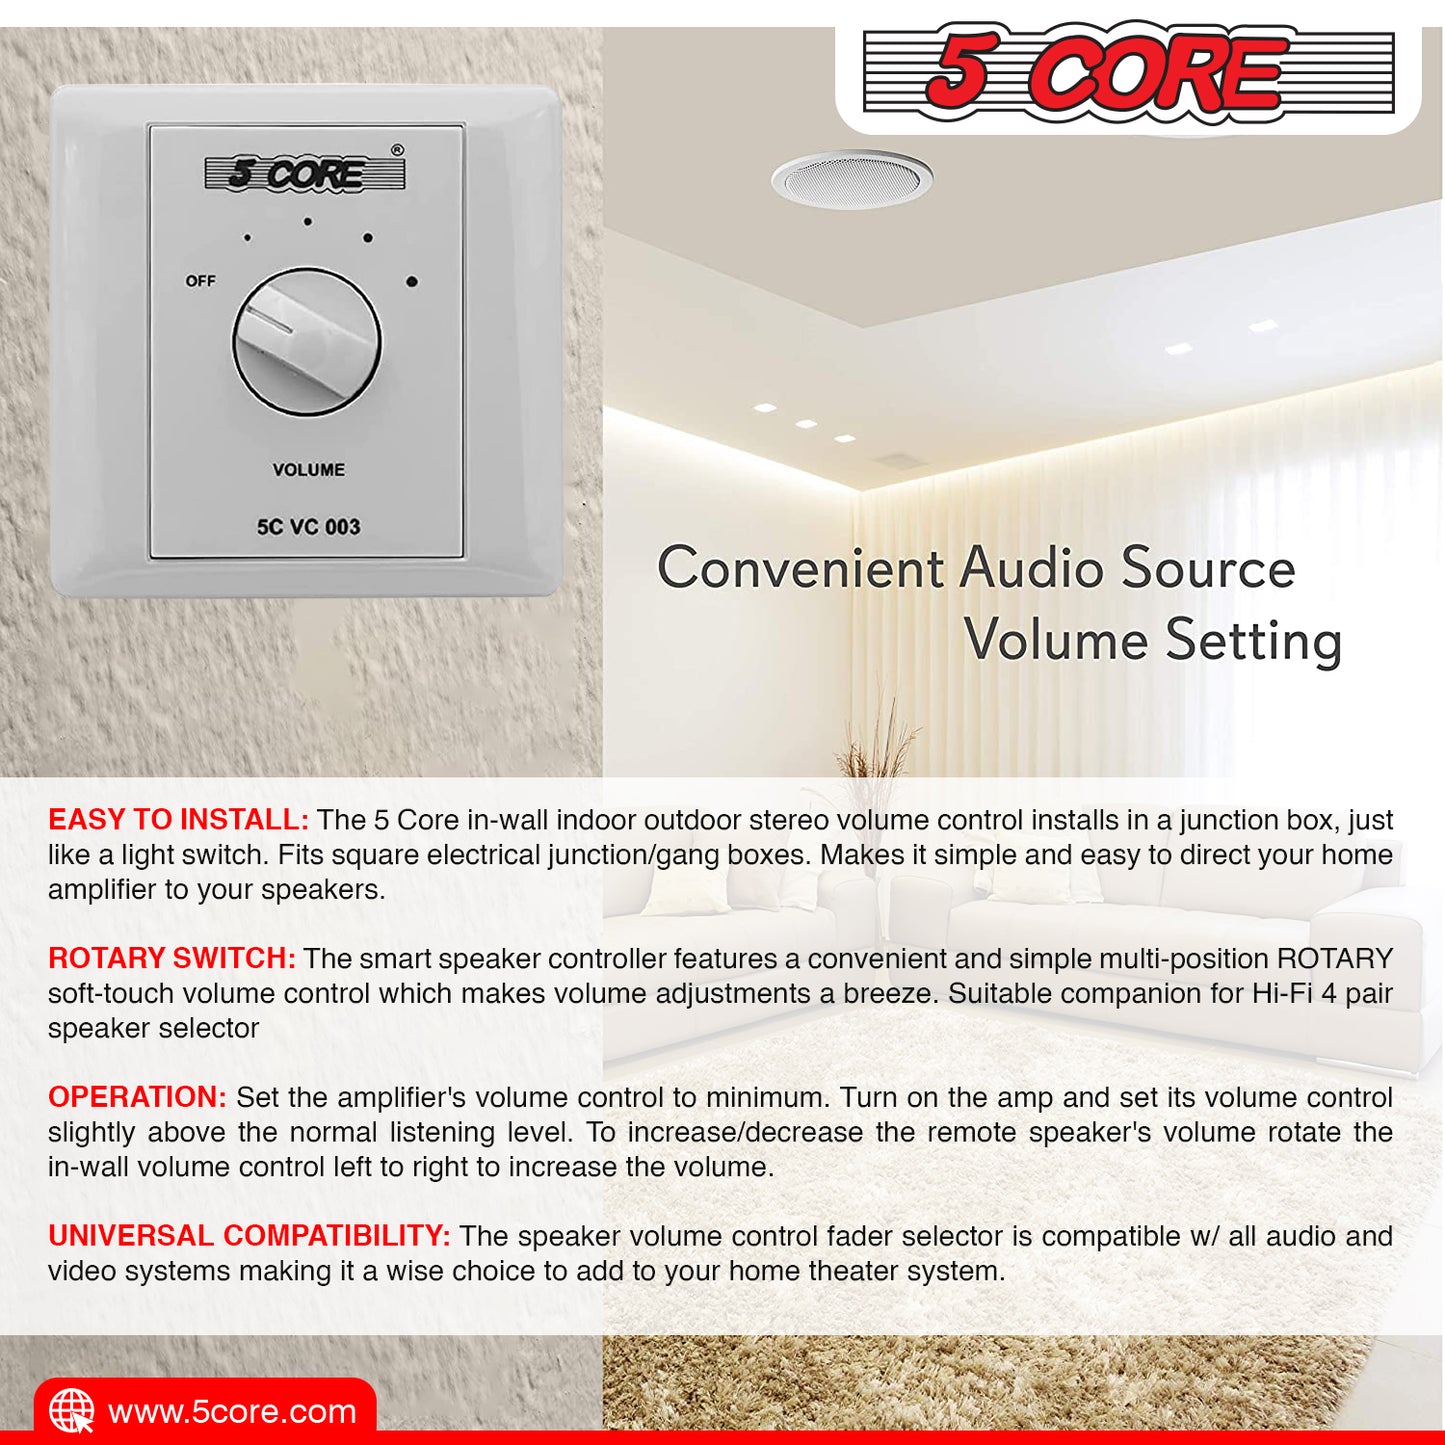 5Core Volume Control for Speakers Rotary Volume Knob Wall Mount Ceiling Speaker Audio Controller in Wall 5 Core VC003